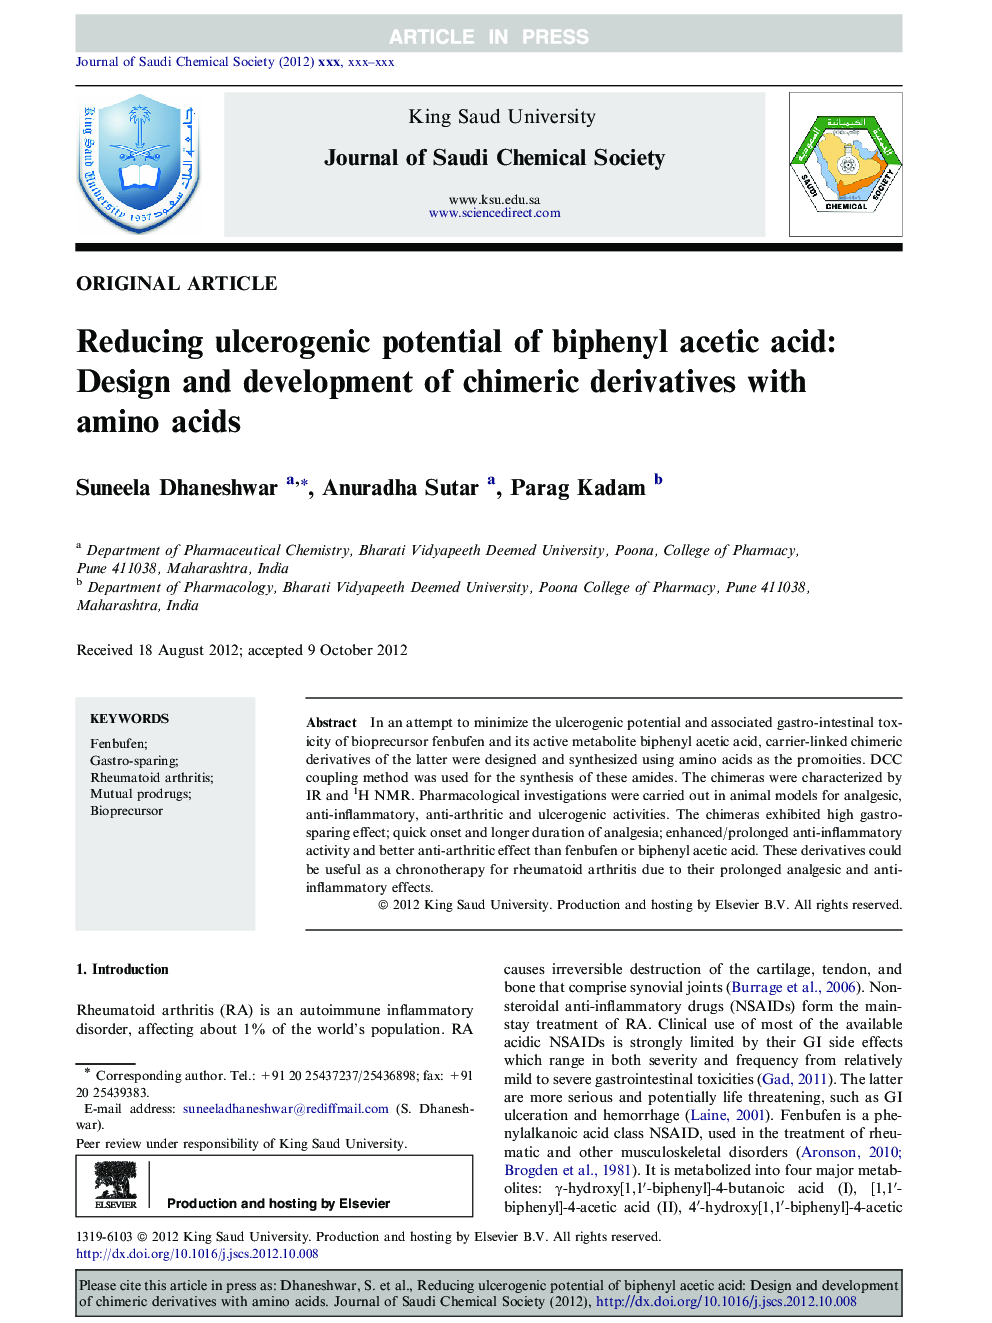 Reducing ulcerogenic potential of biphenyl acetic acid: Design and development of chimeric derivatives with amino acids